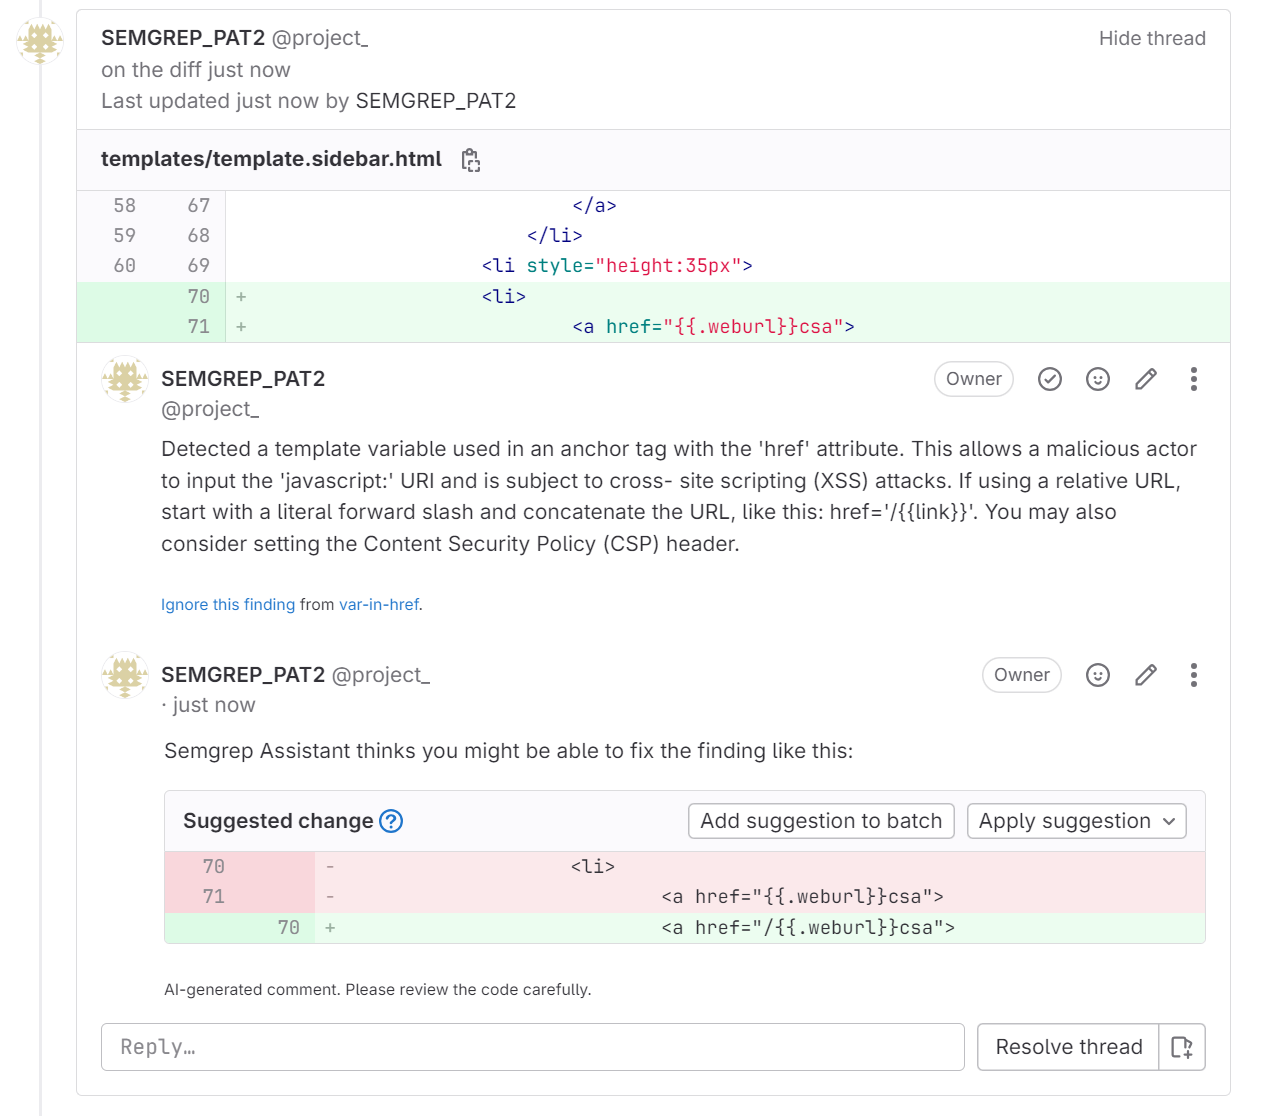 MR comment from Semgrep Assistant in GitLab